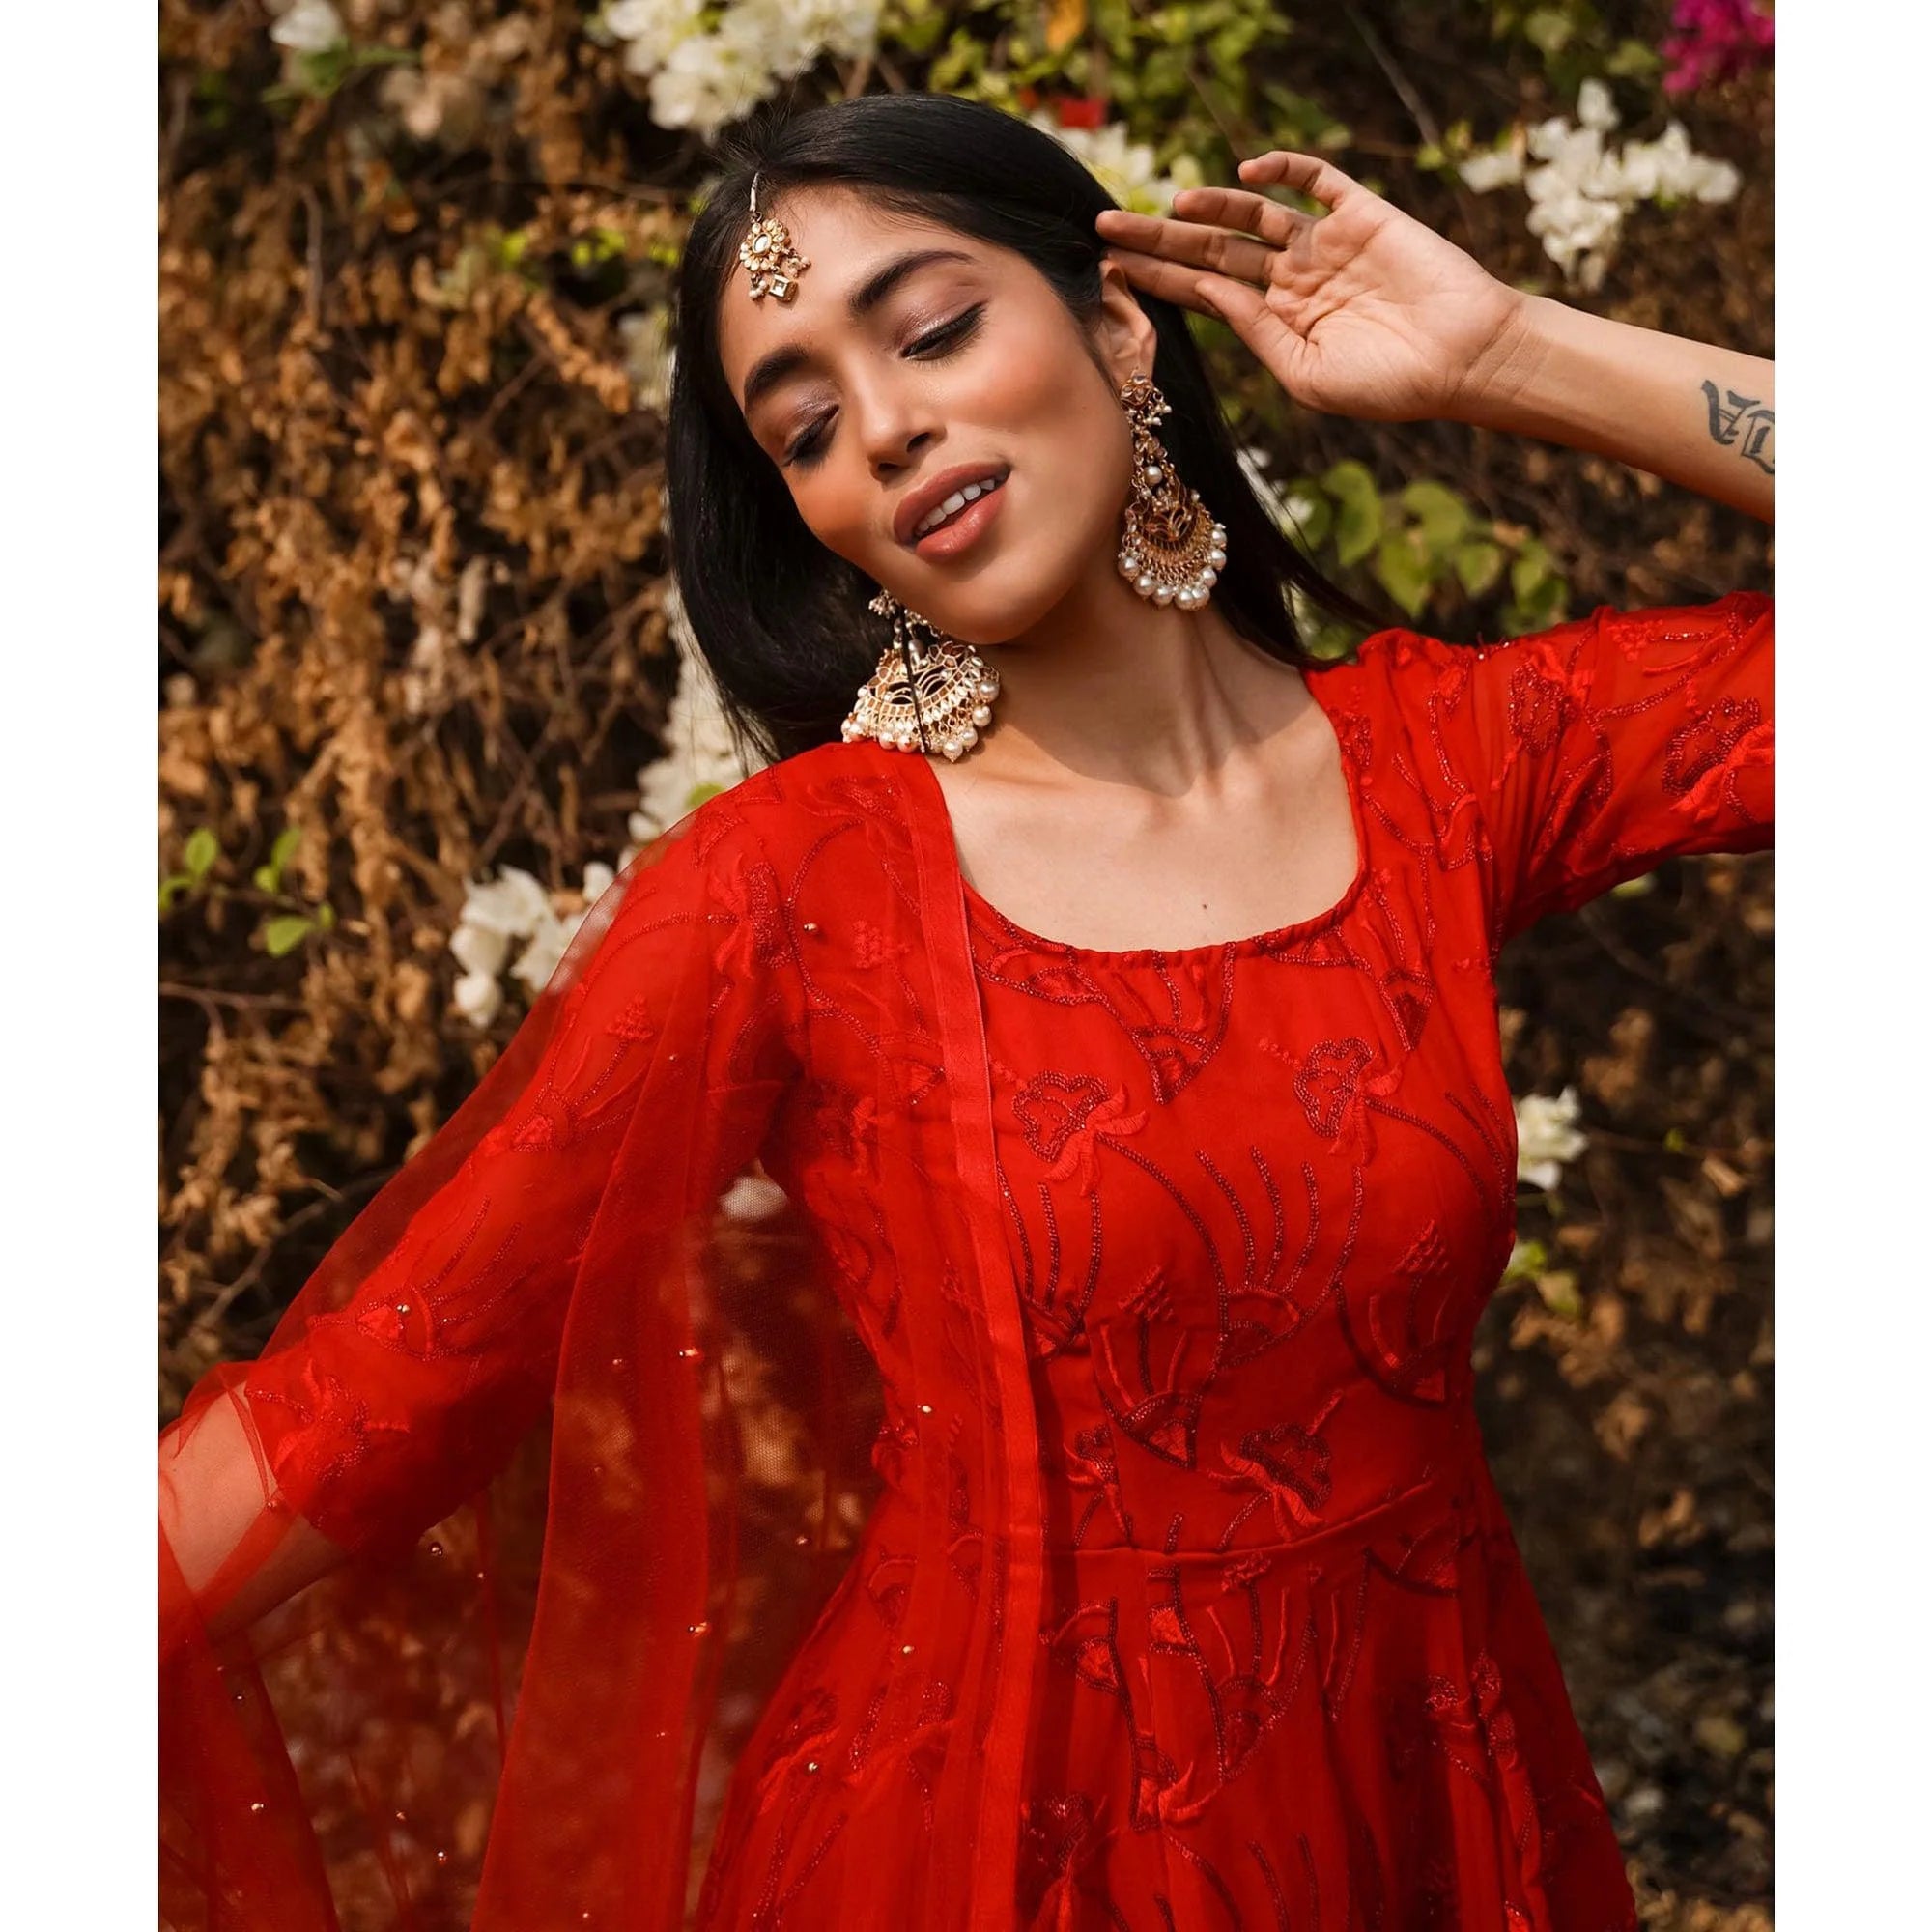 Designer Bollywood Red Gown withh Full Embroidery Work | Ethnicroop